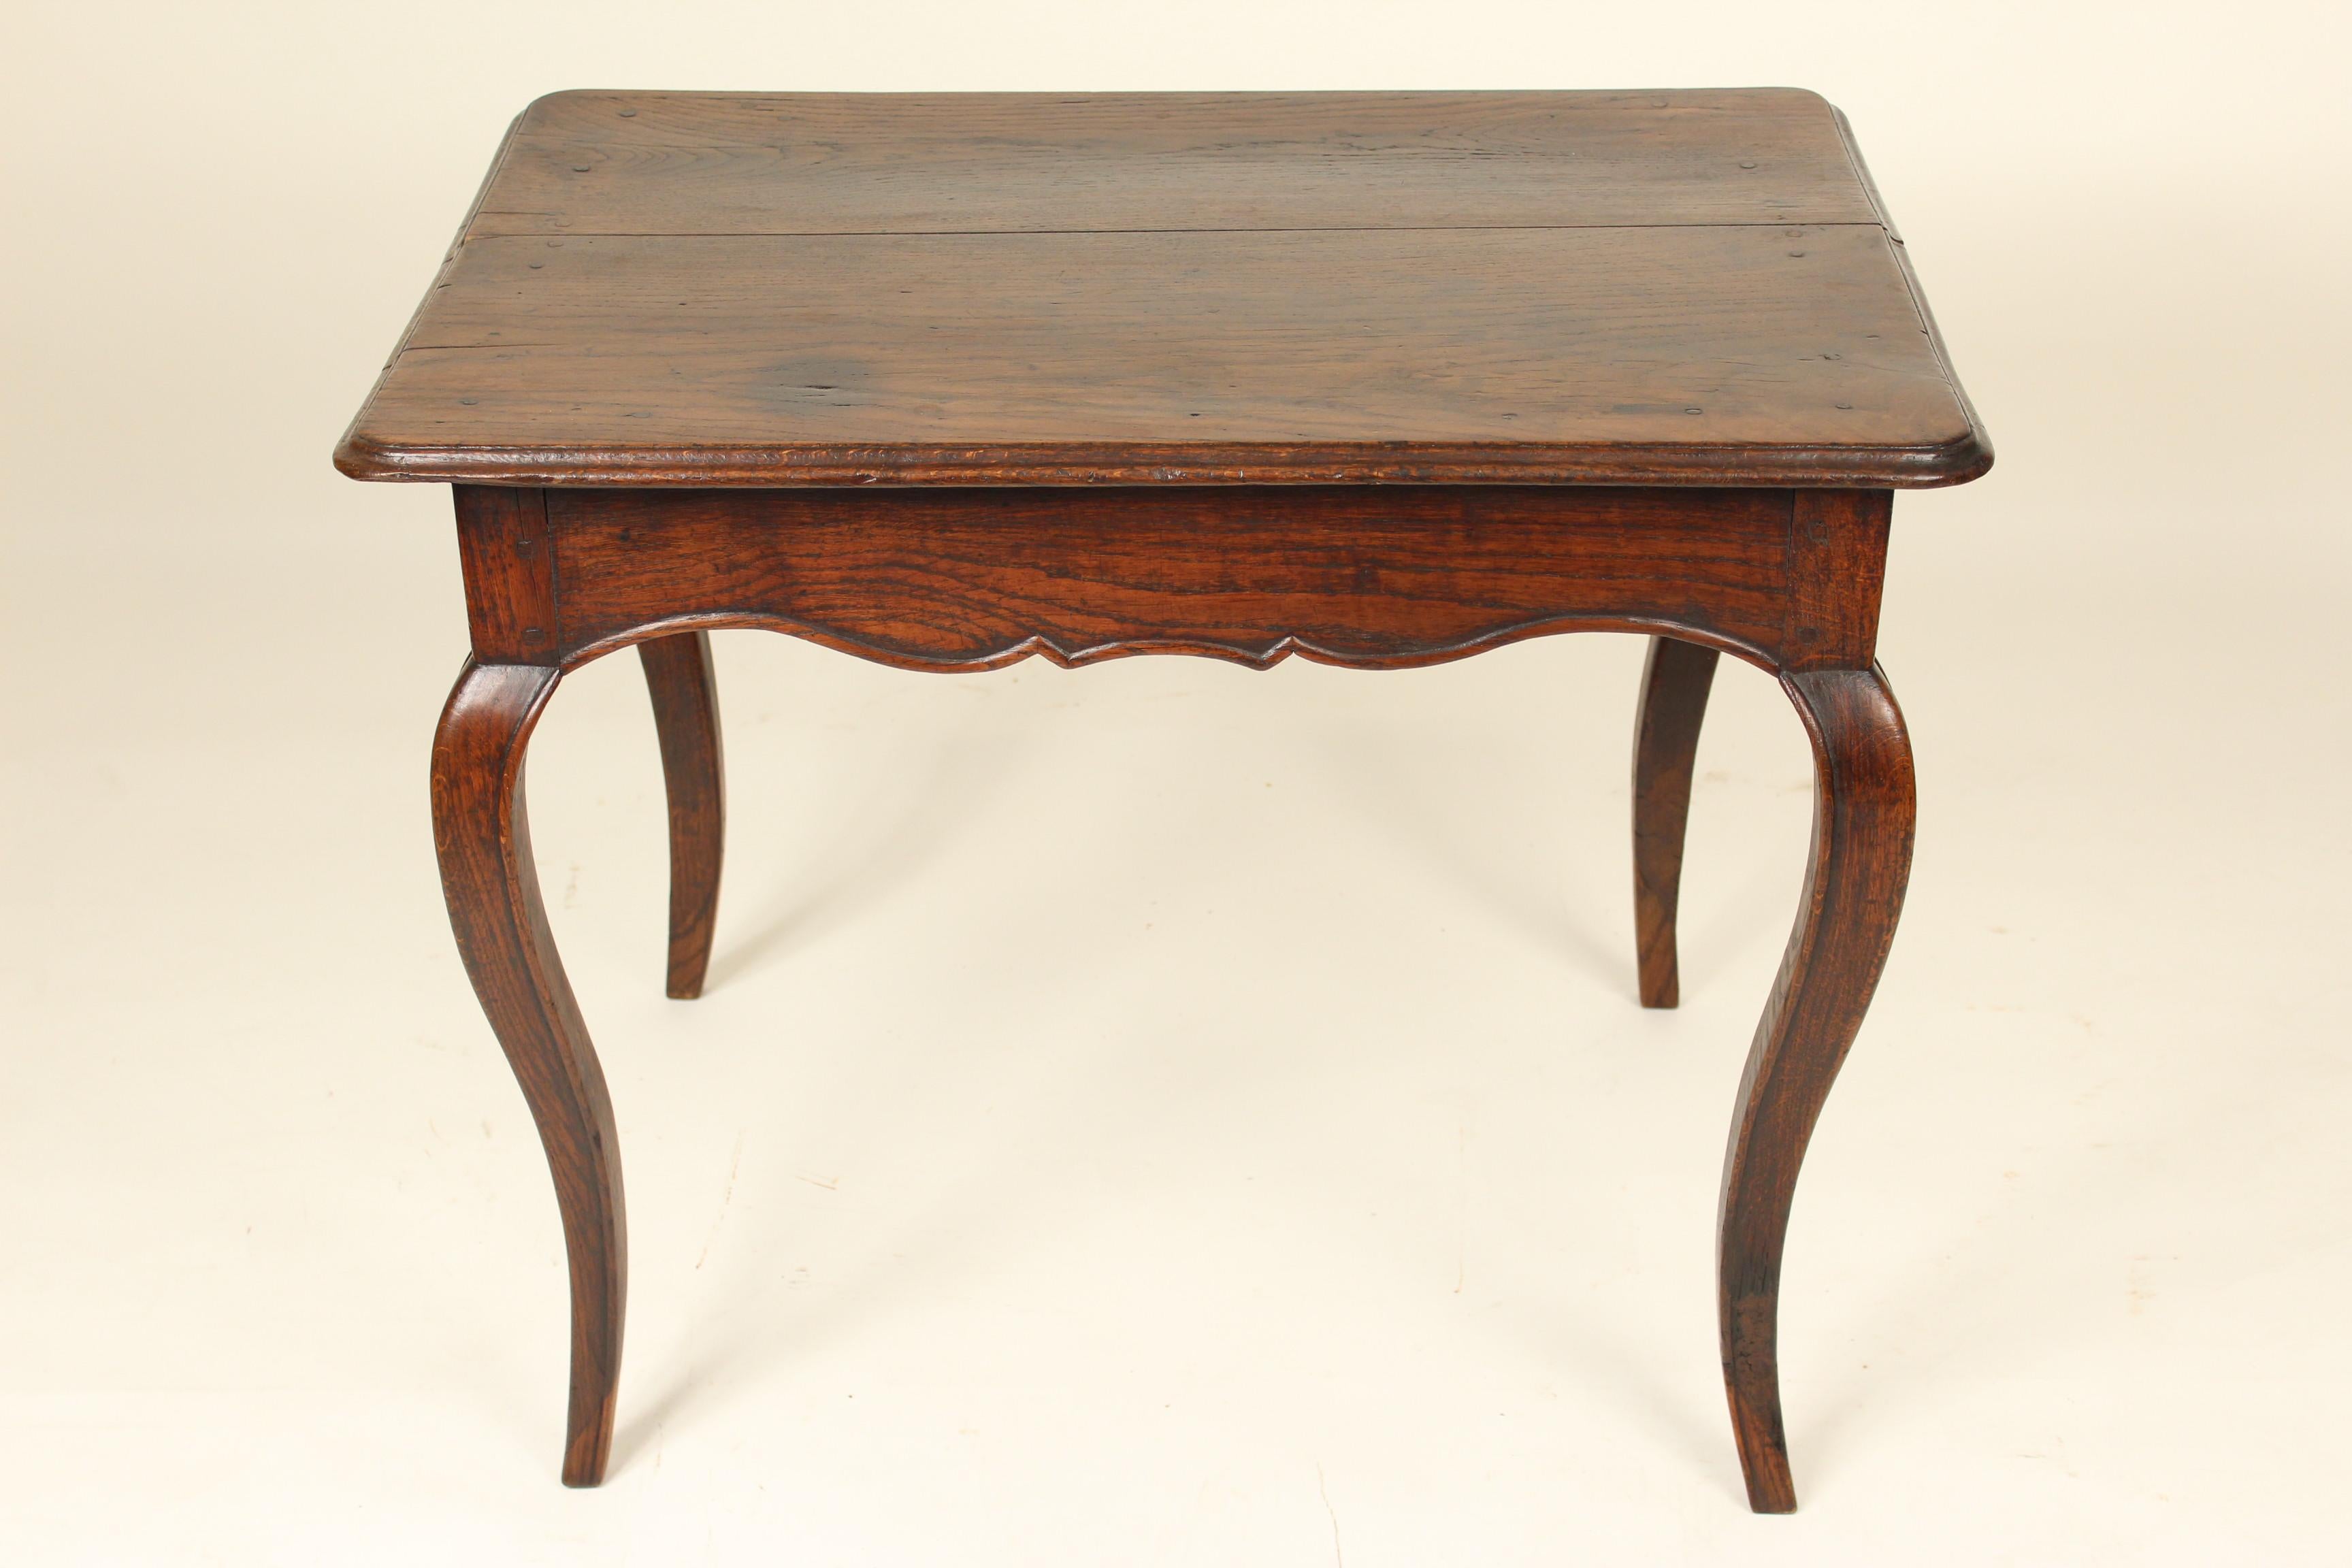 Louis XV Provincial oak occasional table, early 19th century. With a two board top, cabriole legs and scalloped apron. Mortise tenon and dowel construction.